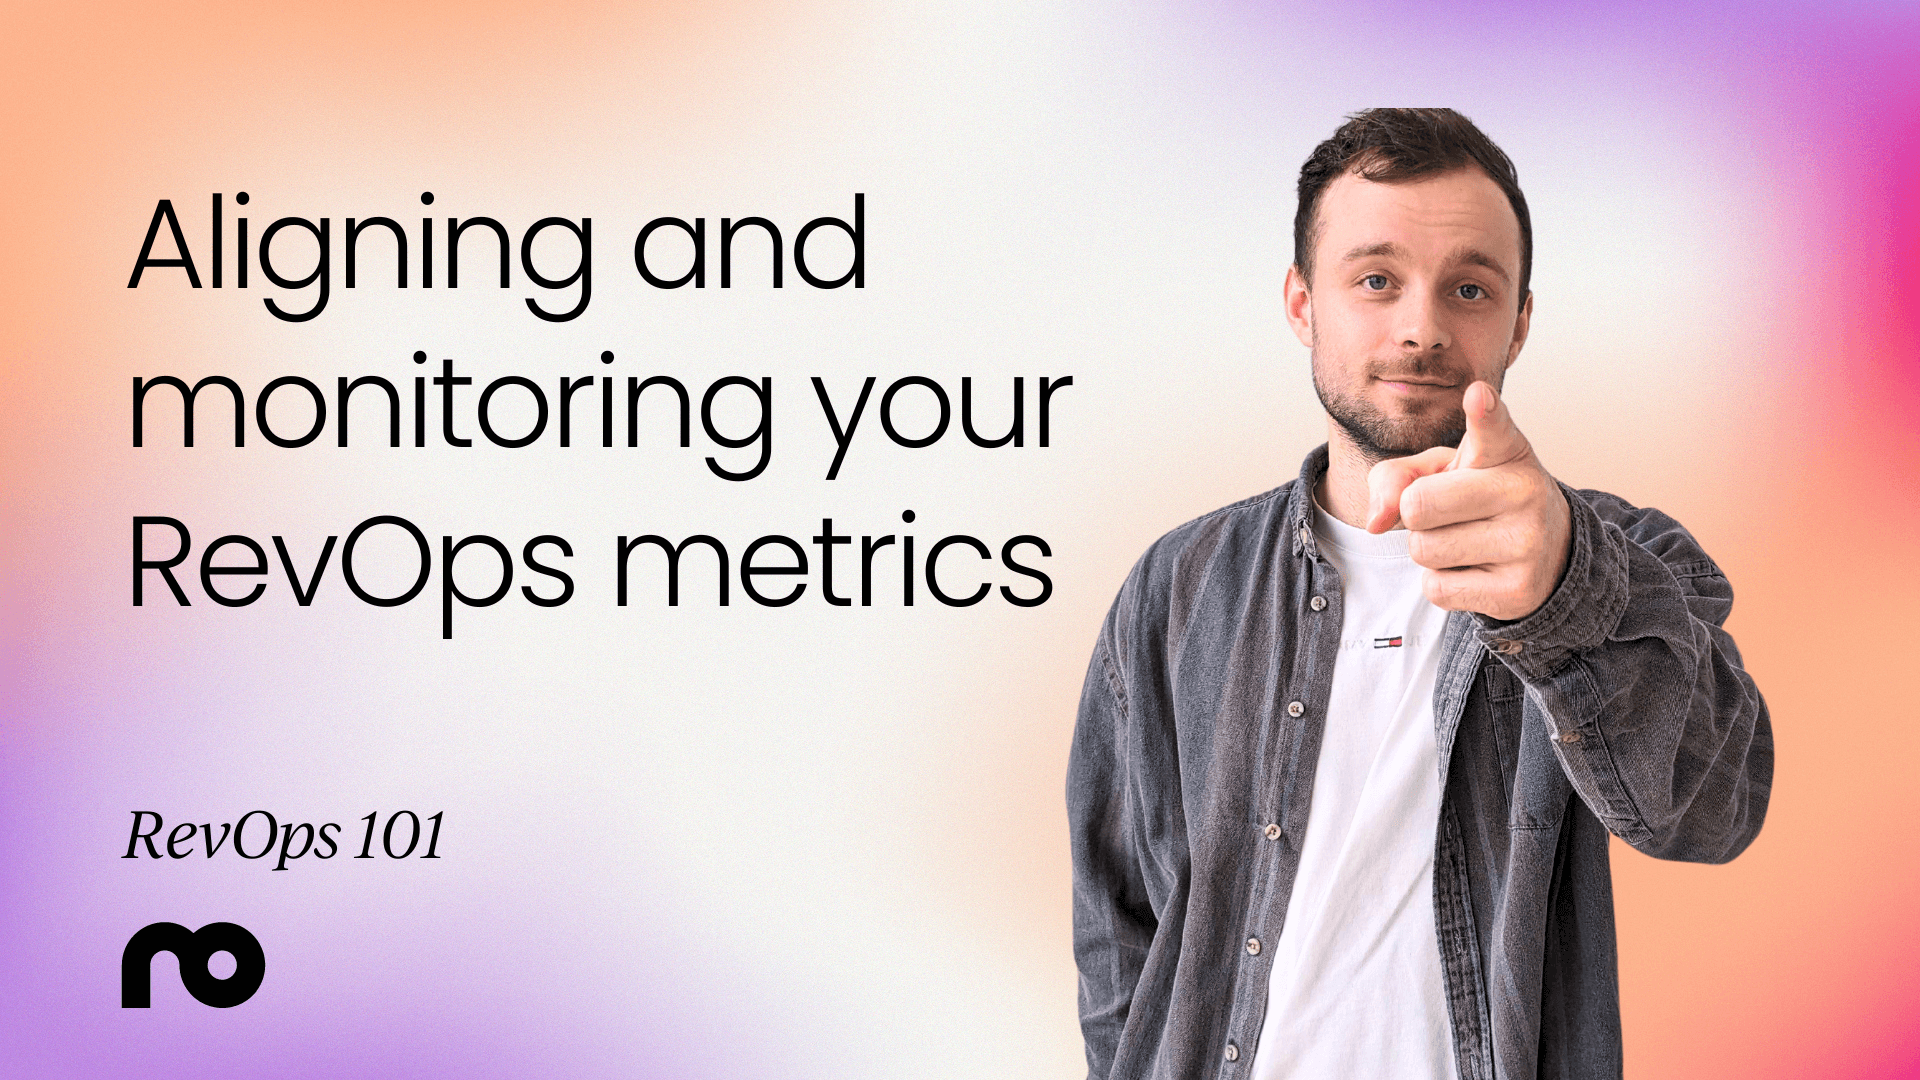 Aligning and monitoring your revenue operations metrics